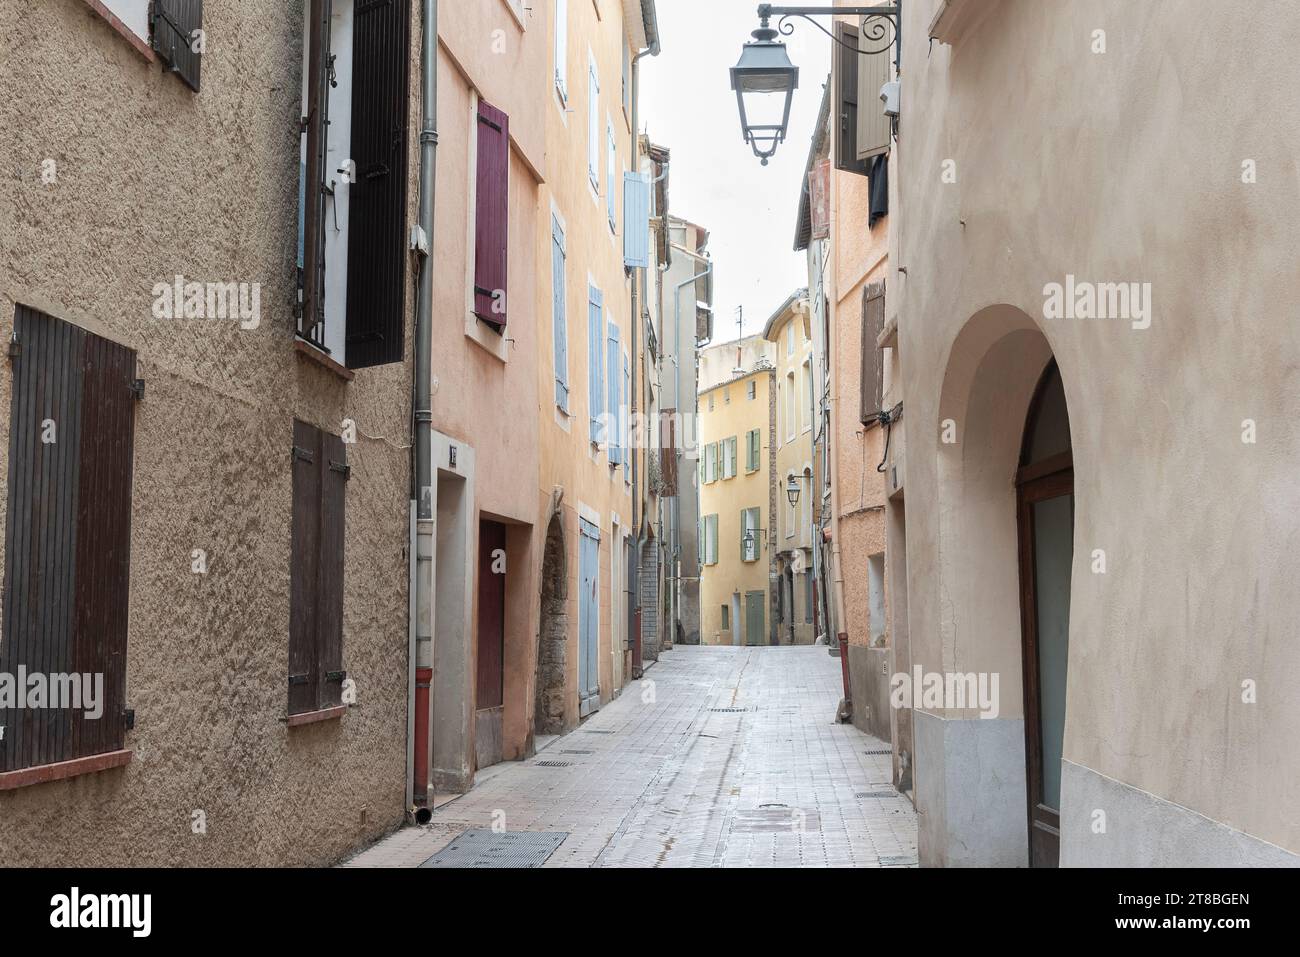 Narrow side alleys in the historic city center of Manosque, France on a cloudy and rainy day Stock Photo